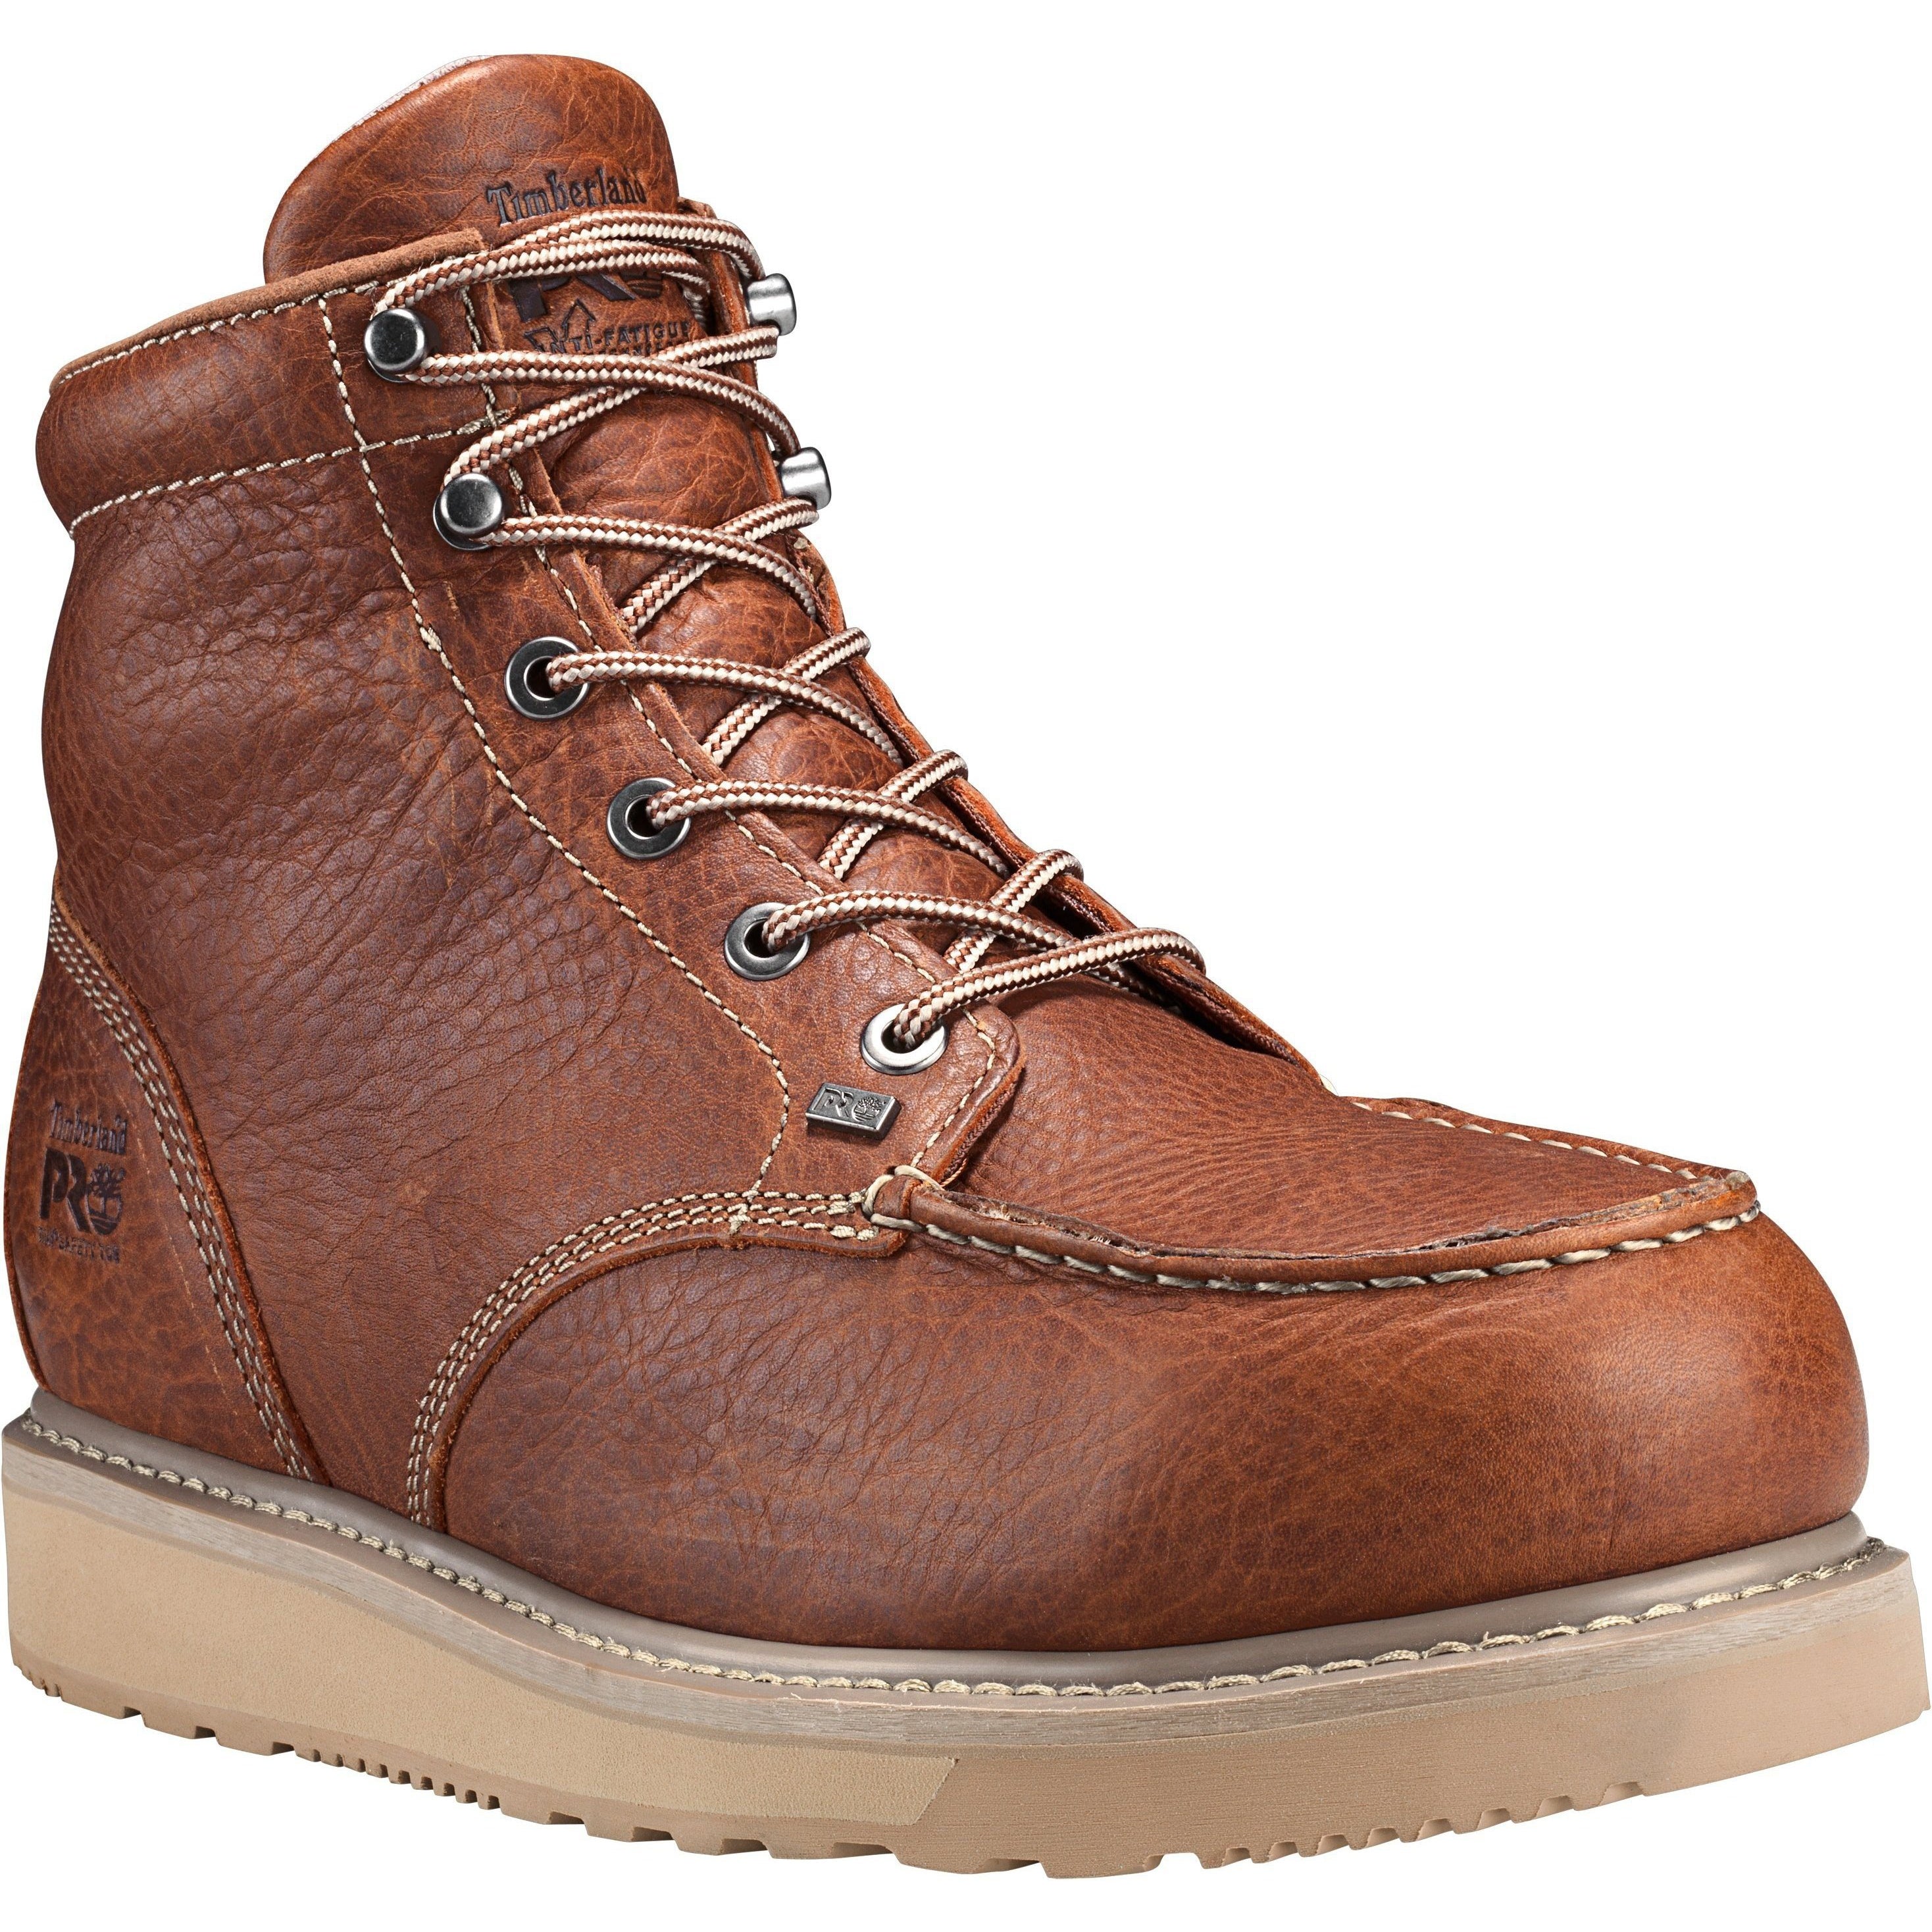 Timberland PRO Men's Barstow Wedge 6" Alloy Toe Work Boot TB088559214  - Overlook Boots